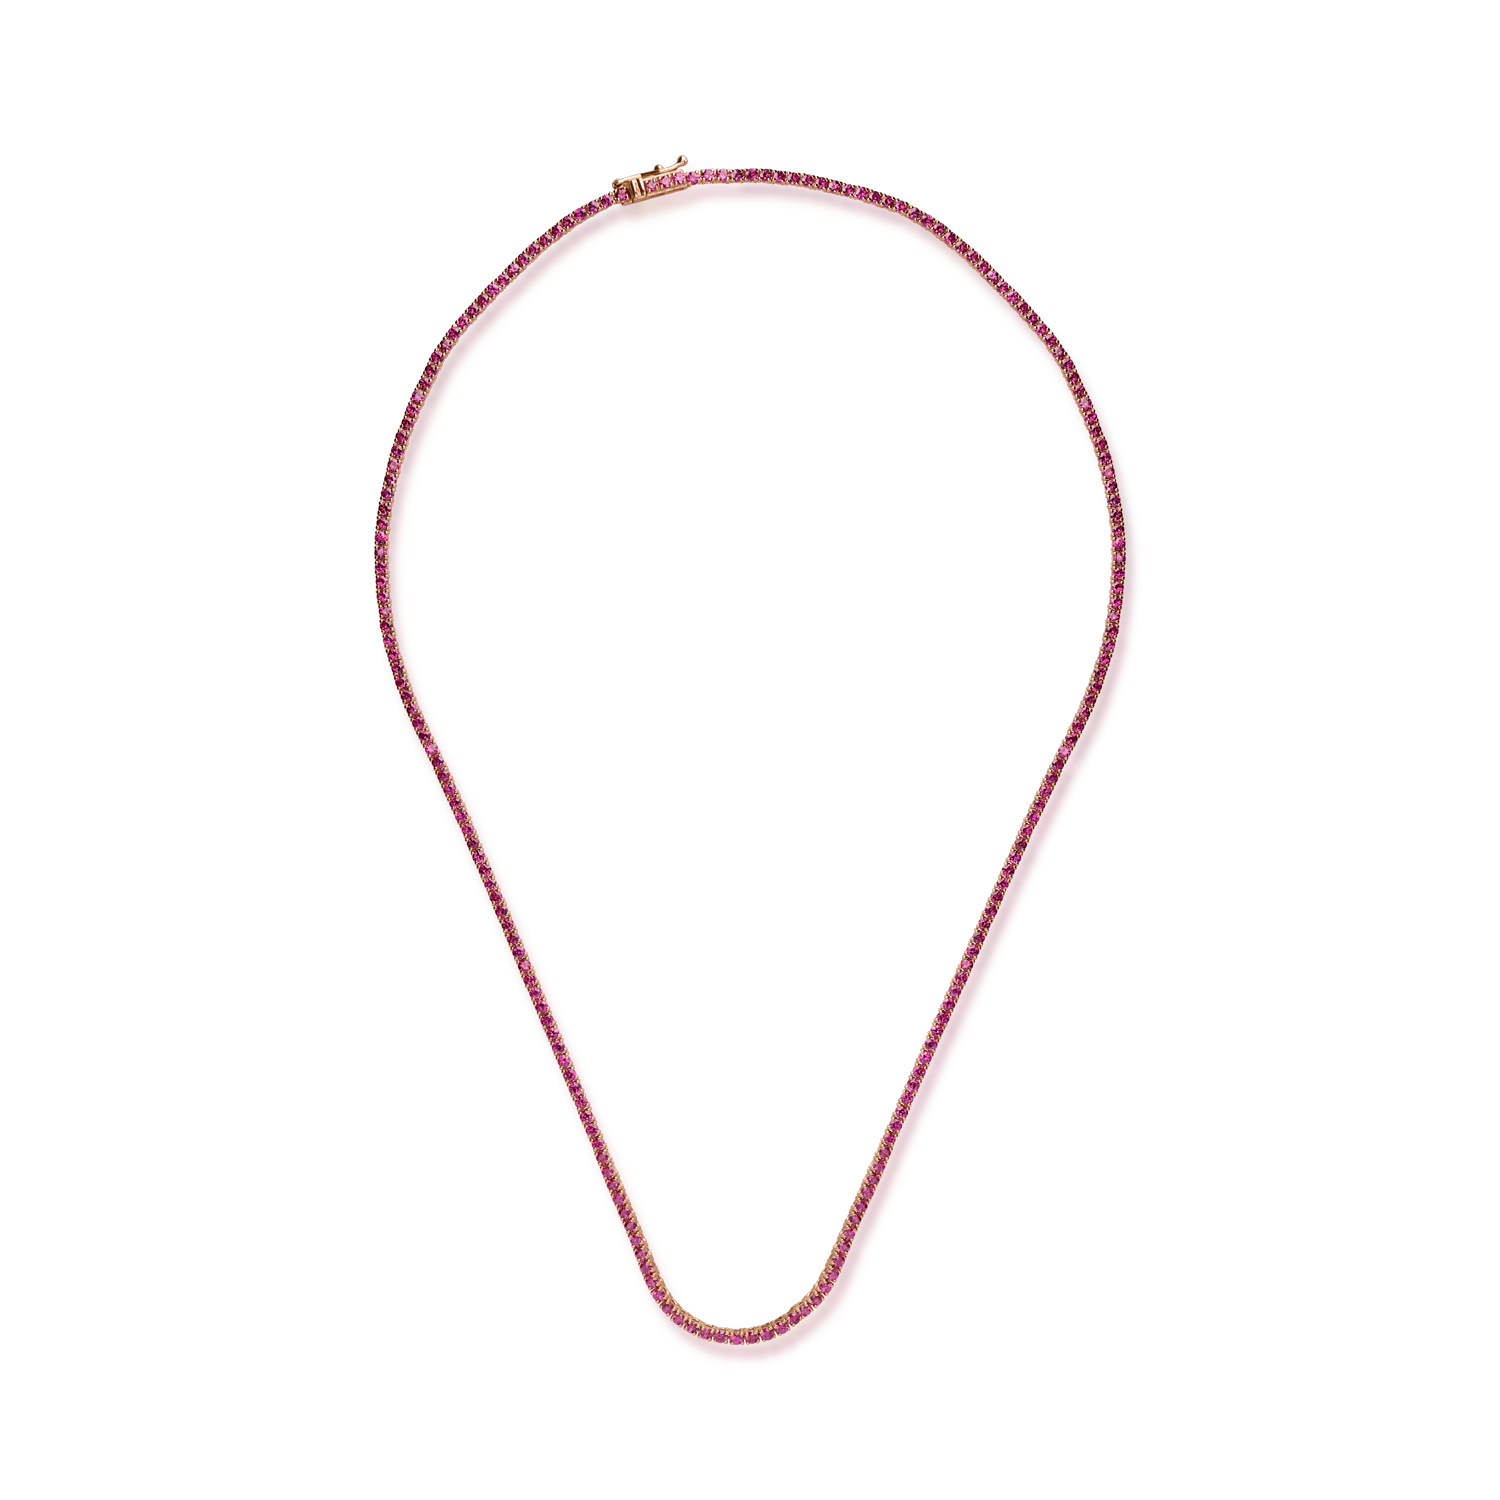 Rose gold tennis necklace with 5.48ct rubies